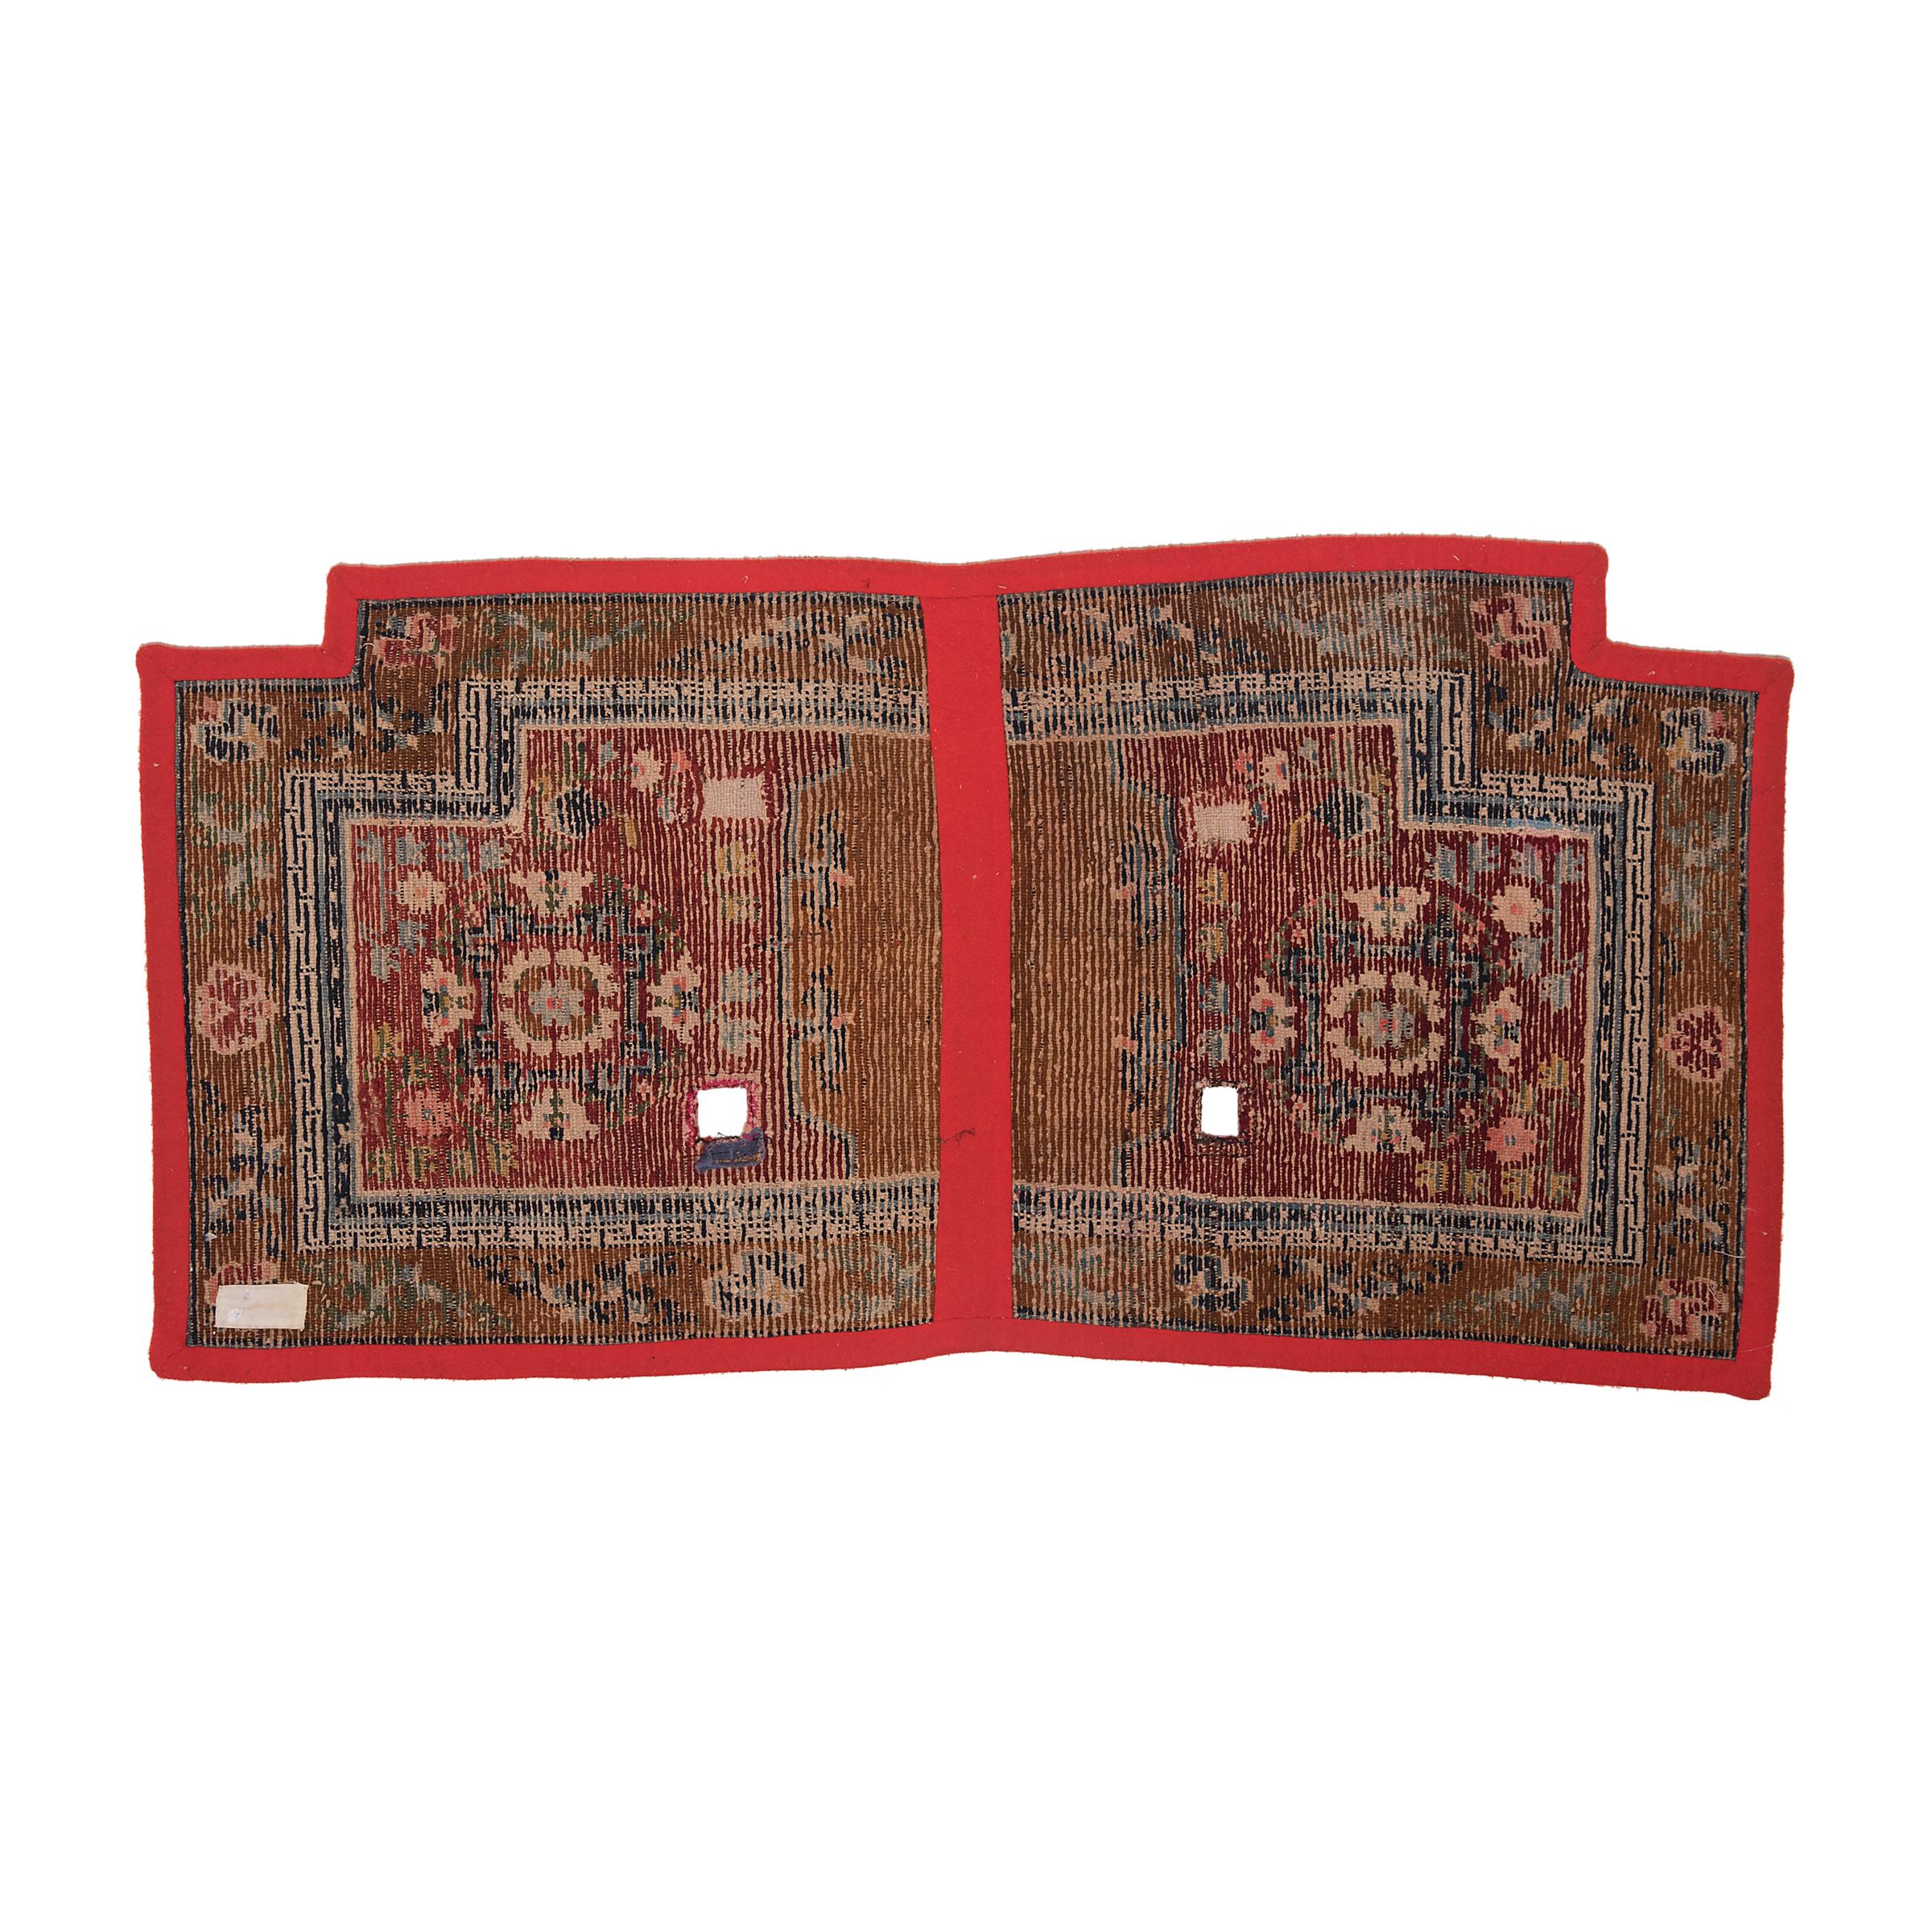 Fabric Tibetan Saddle Carpet with Floral Medallions, c. 1900 For Sale